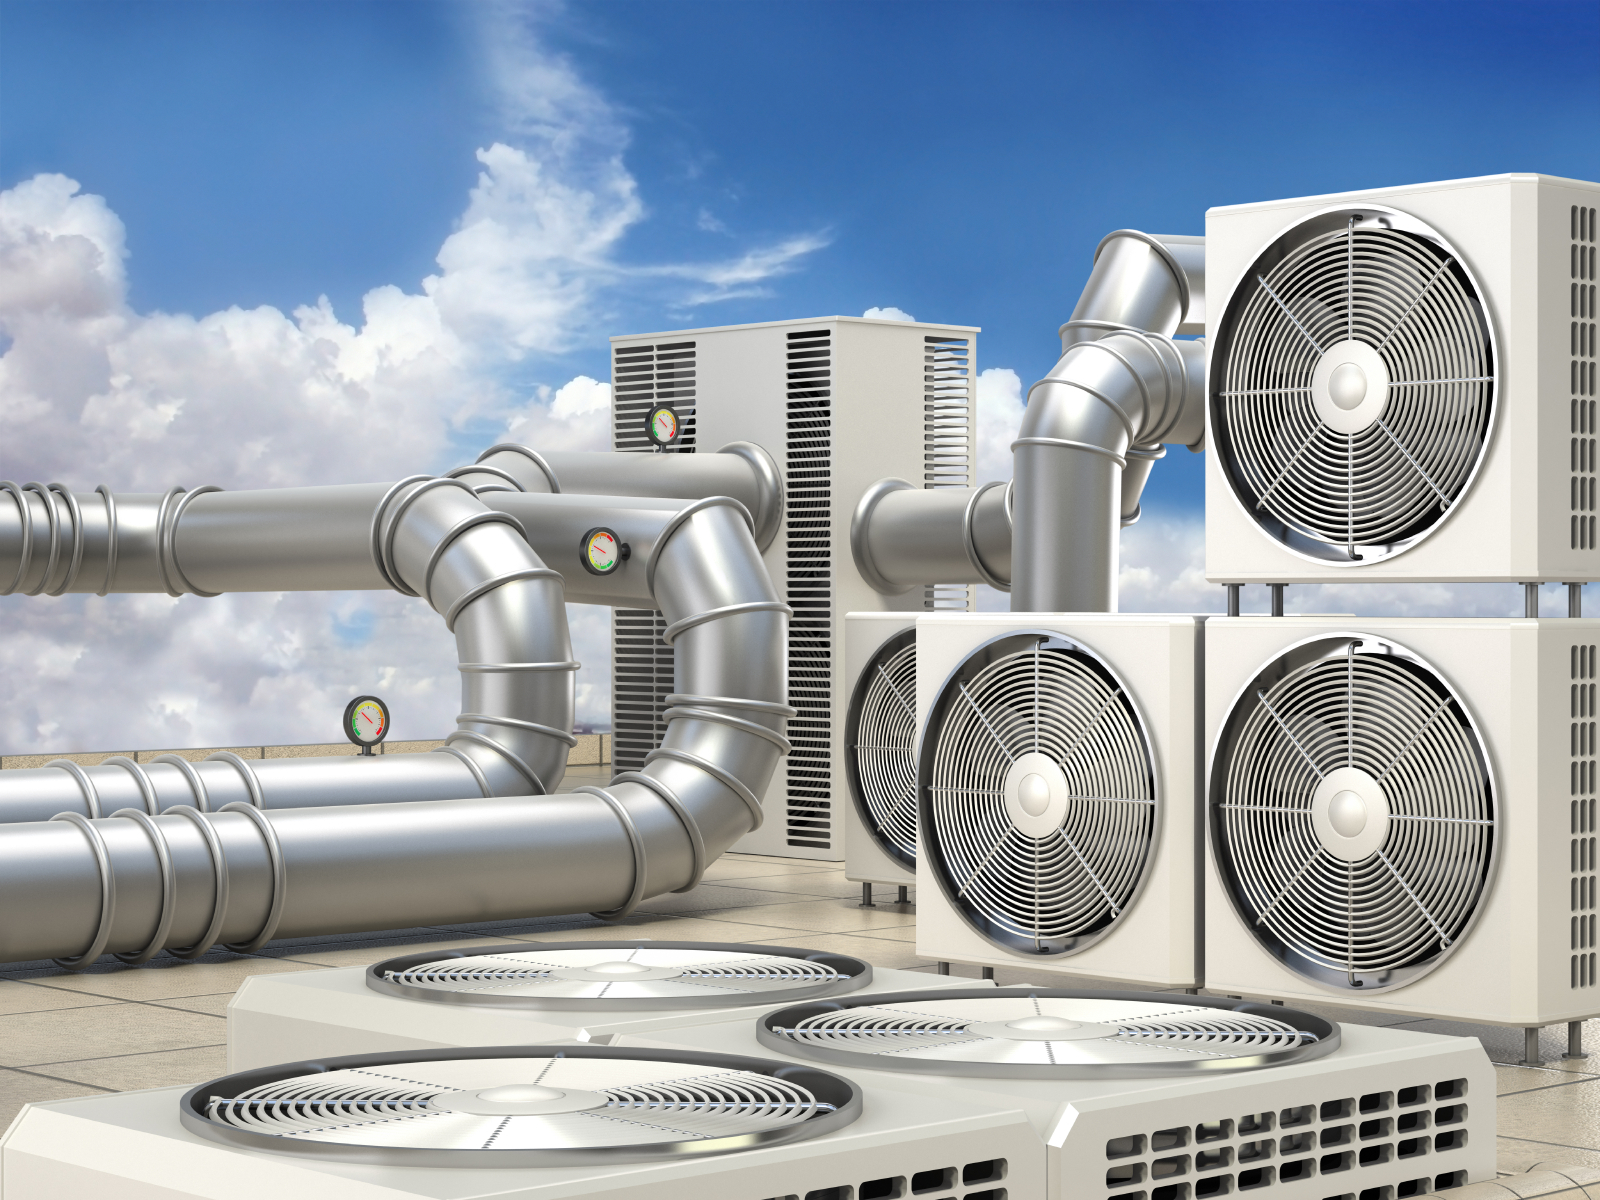 Image Of Hvac Equipment - Heating Ventilation And Air Conditioning , HD Wallpaper & Backgrounds